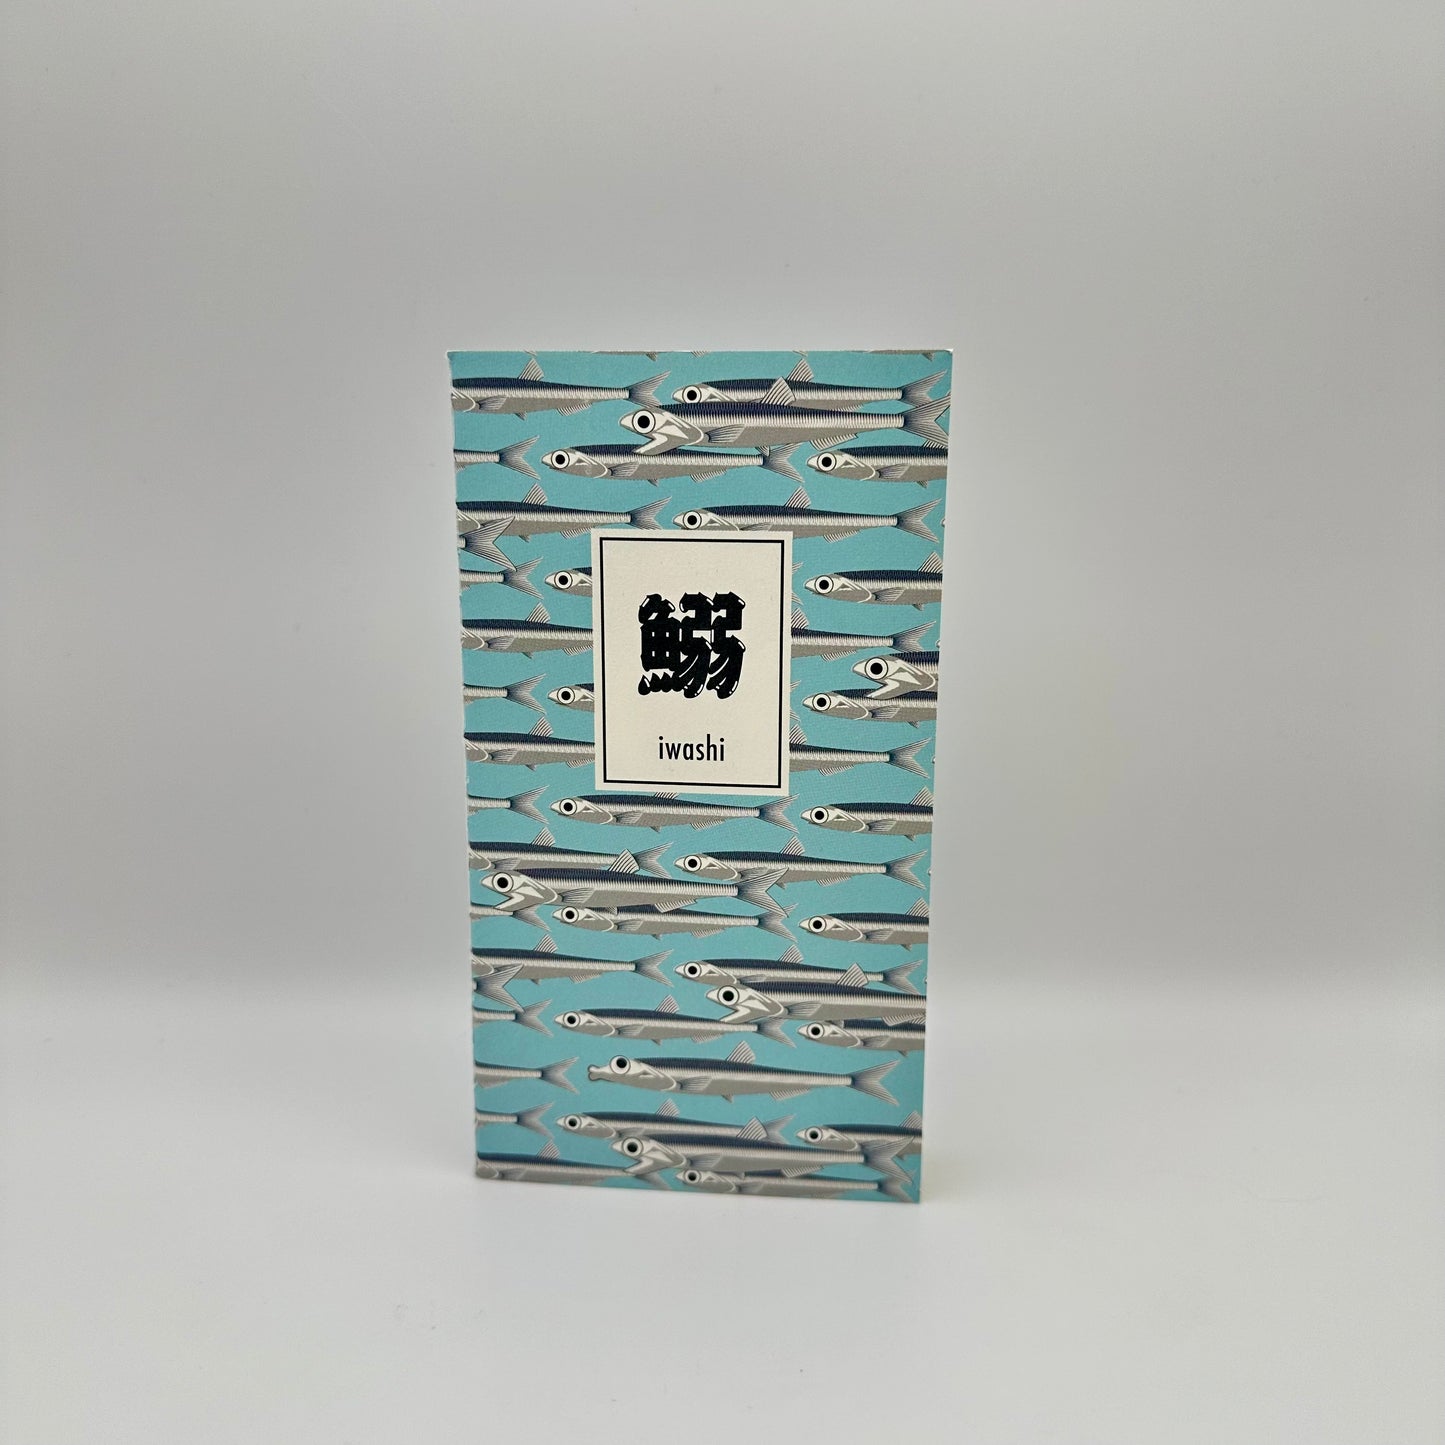 Notebook with blue background with silver sardines swimming. Text box in Japanese that reads "Iwashi"